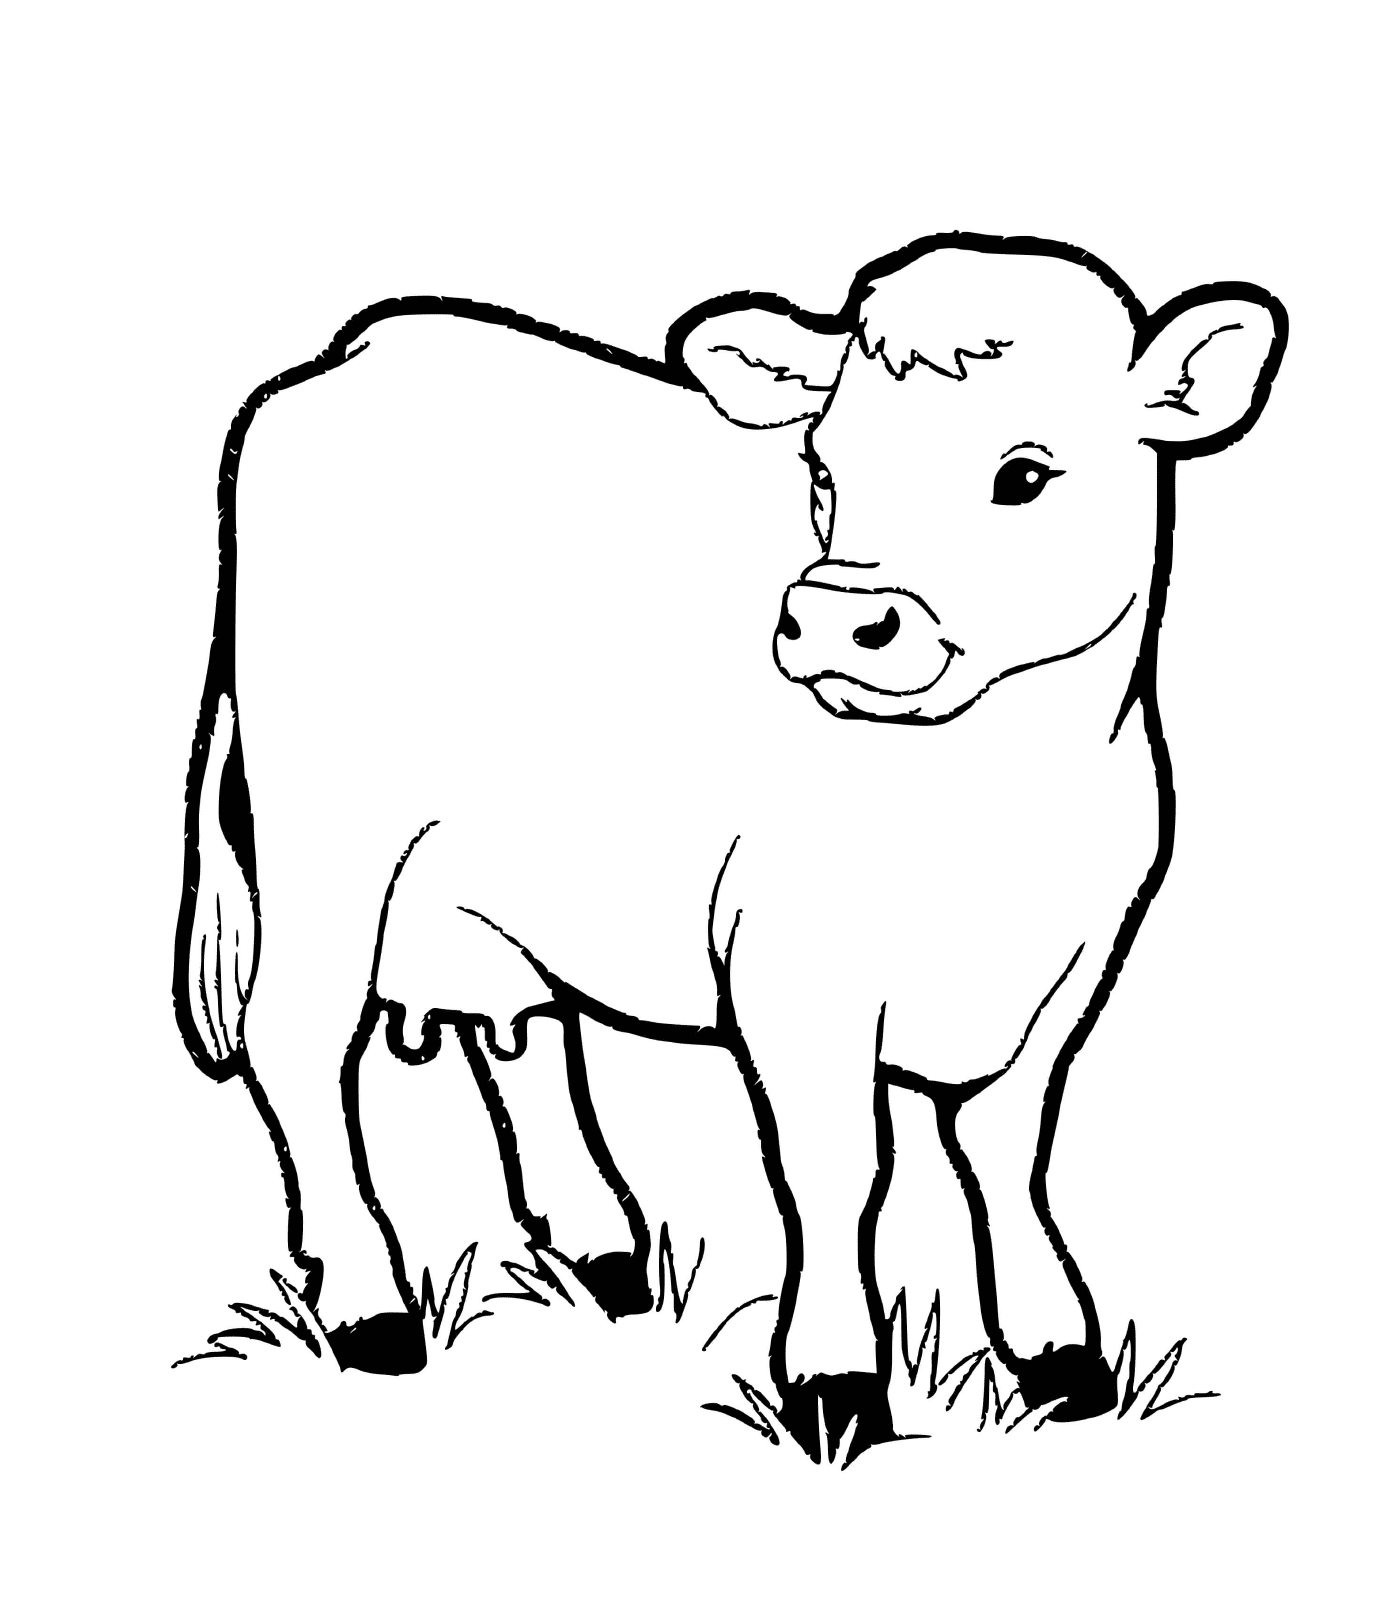  Veal, baby cow 